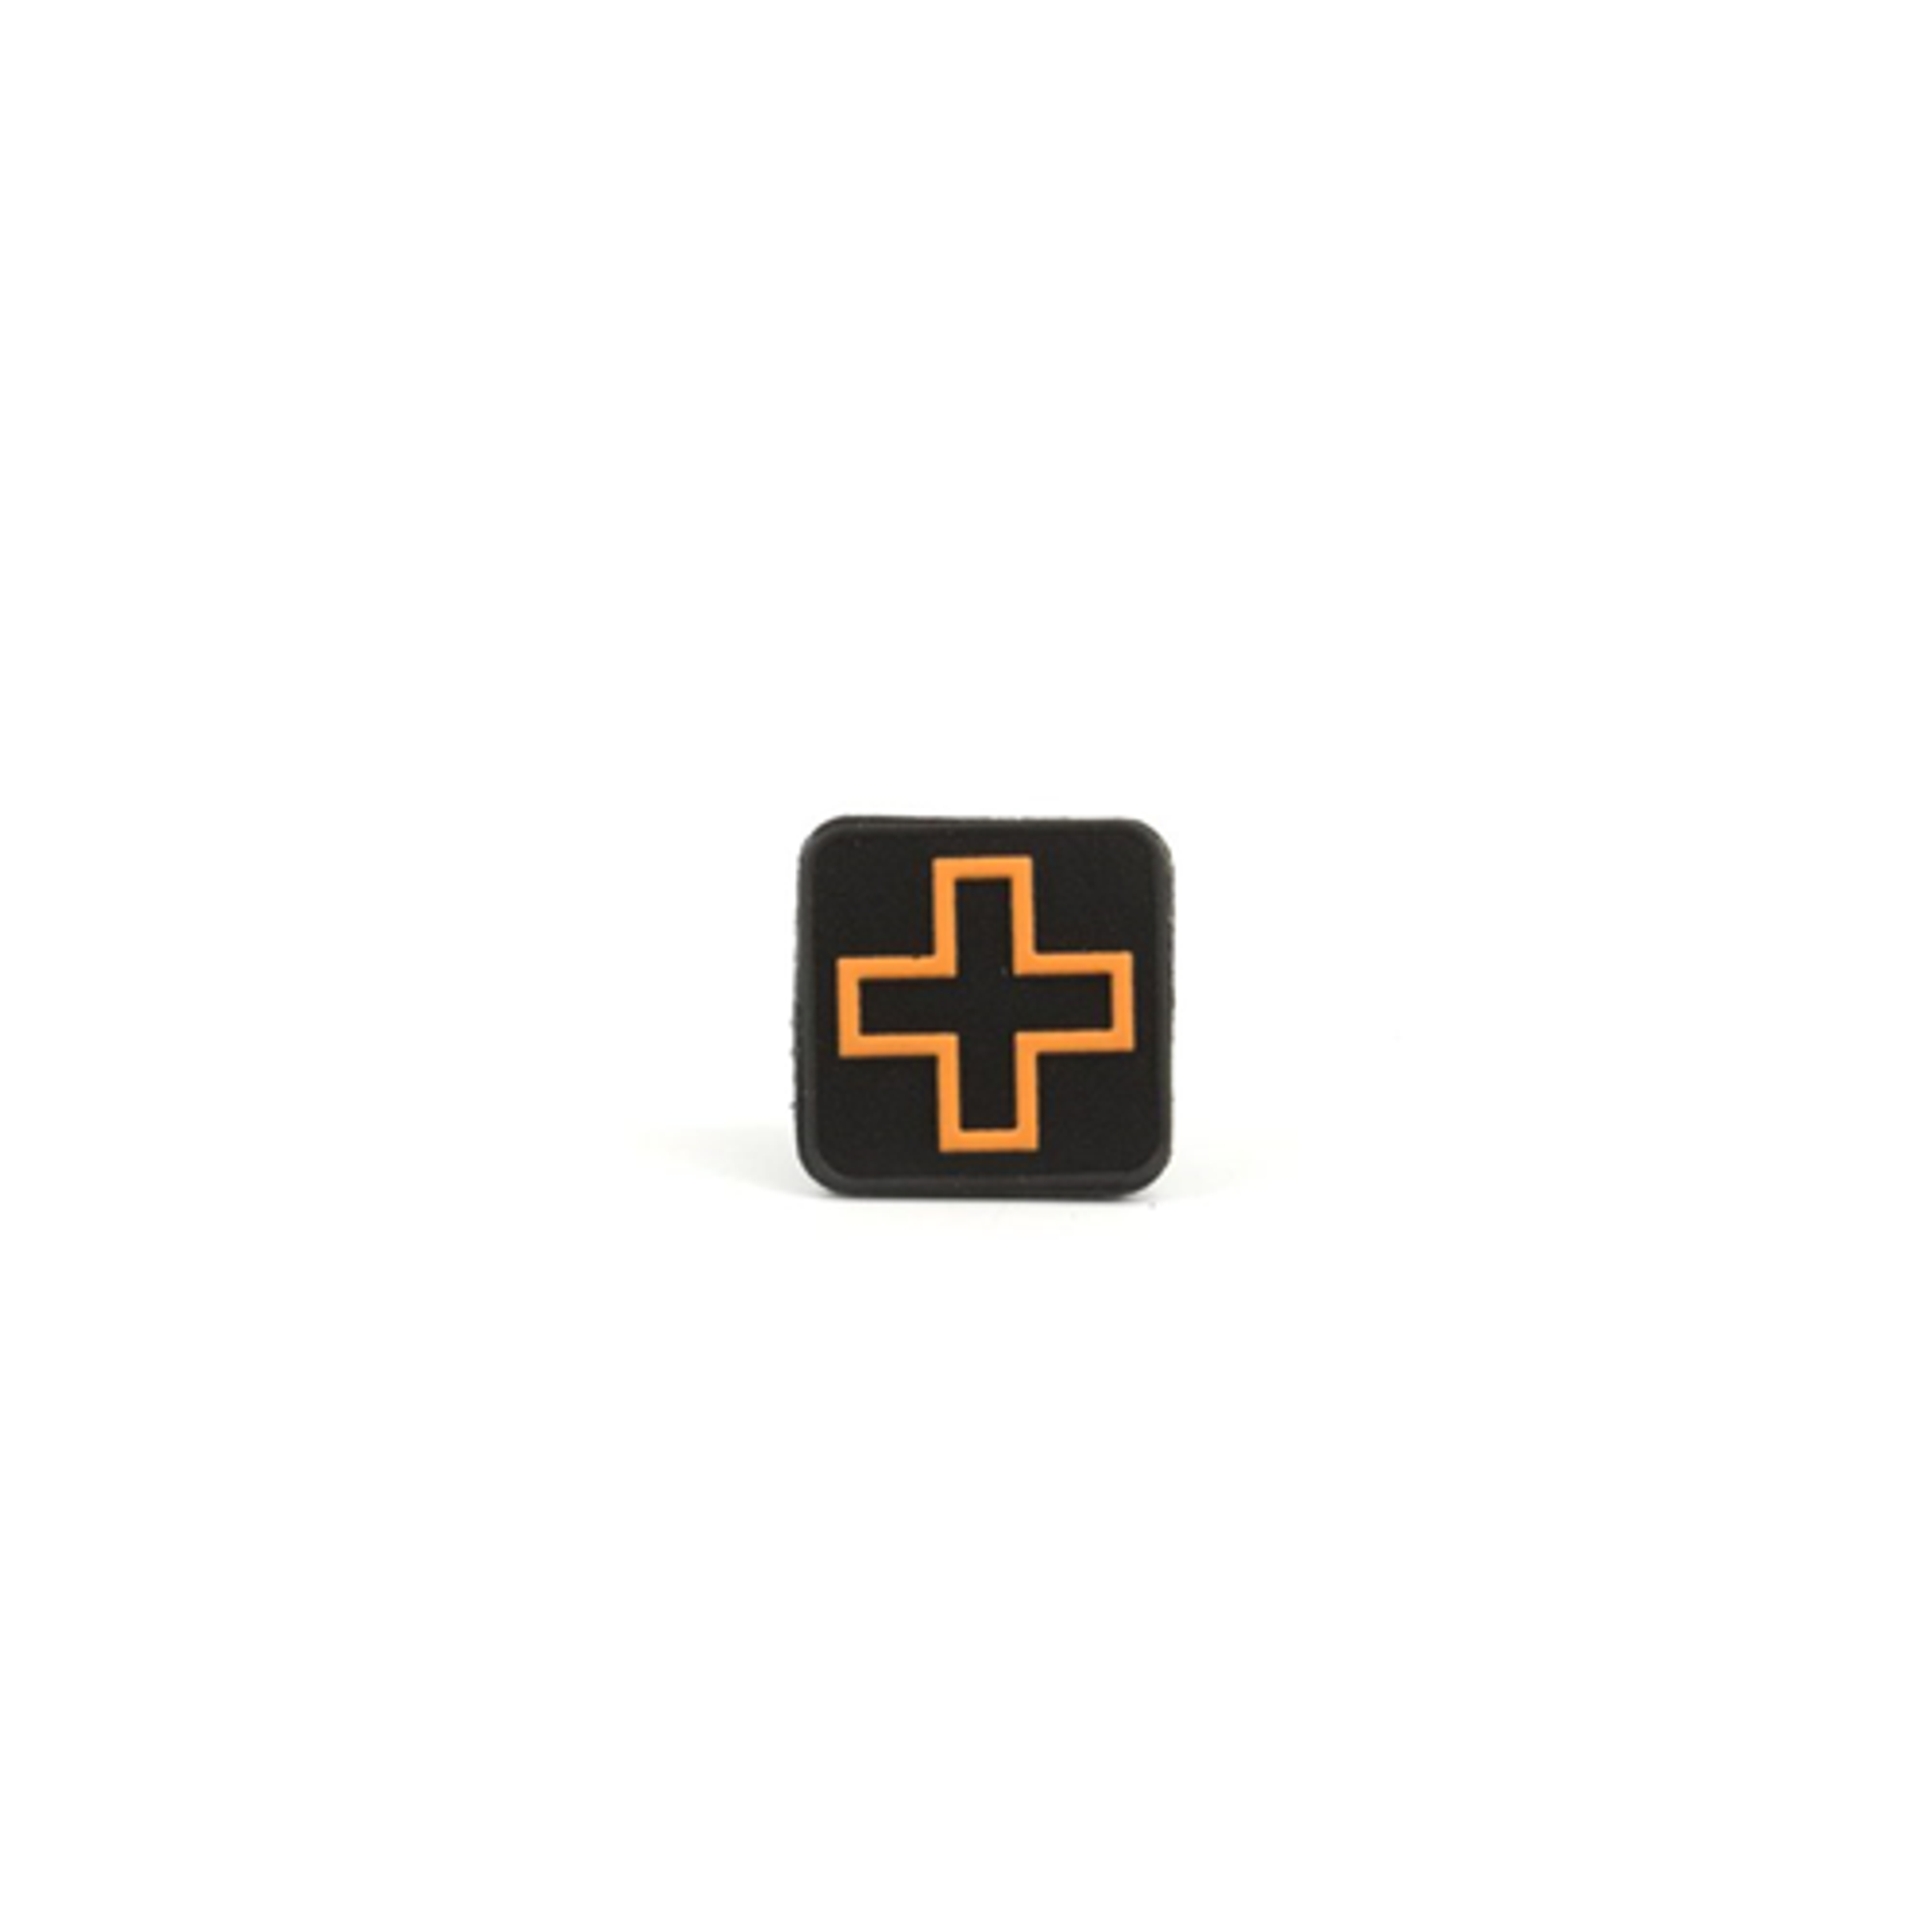 1 Pvc Cross Patches - KRE10-CP-ORG